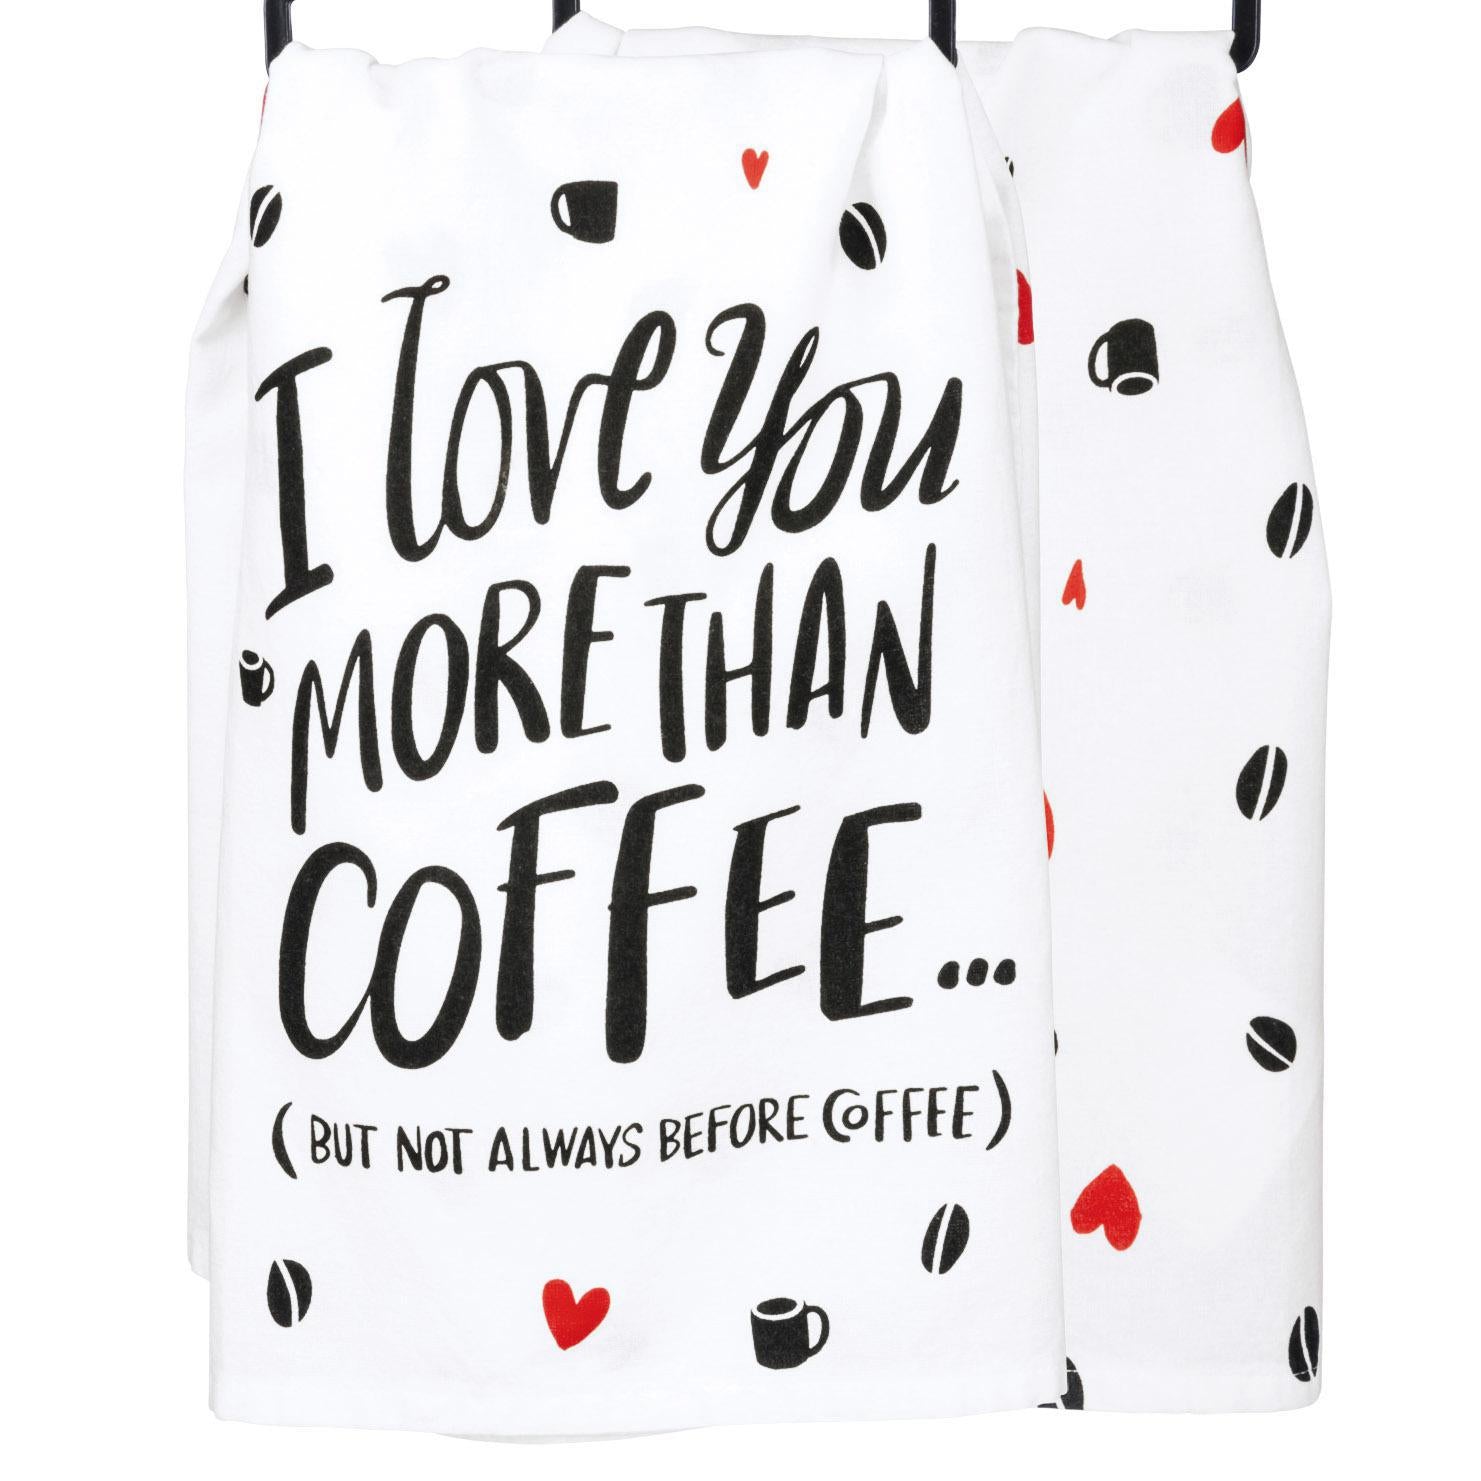 But Not Always Before Coffee Kitchen Towel - Cotton Bliss